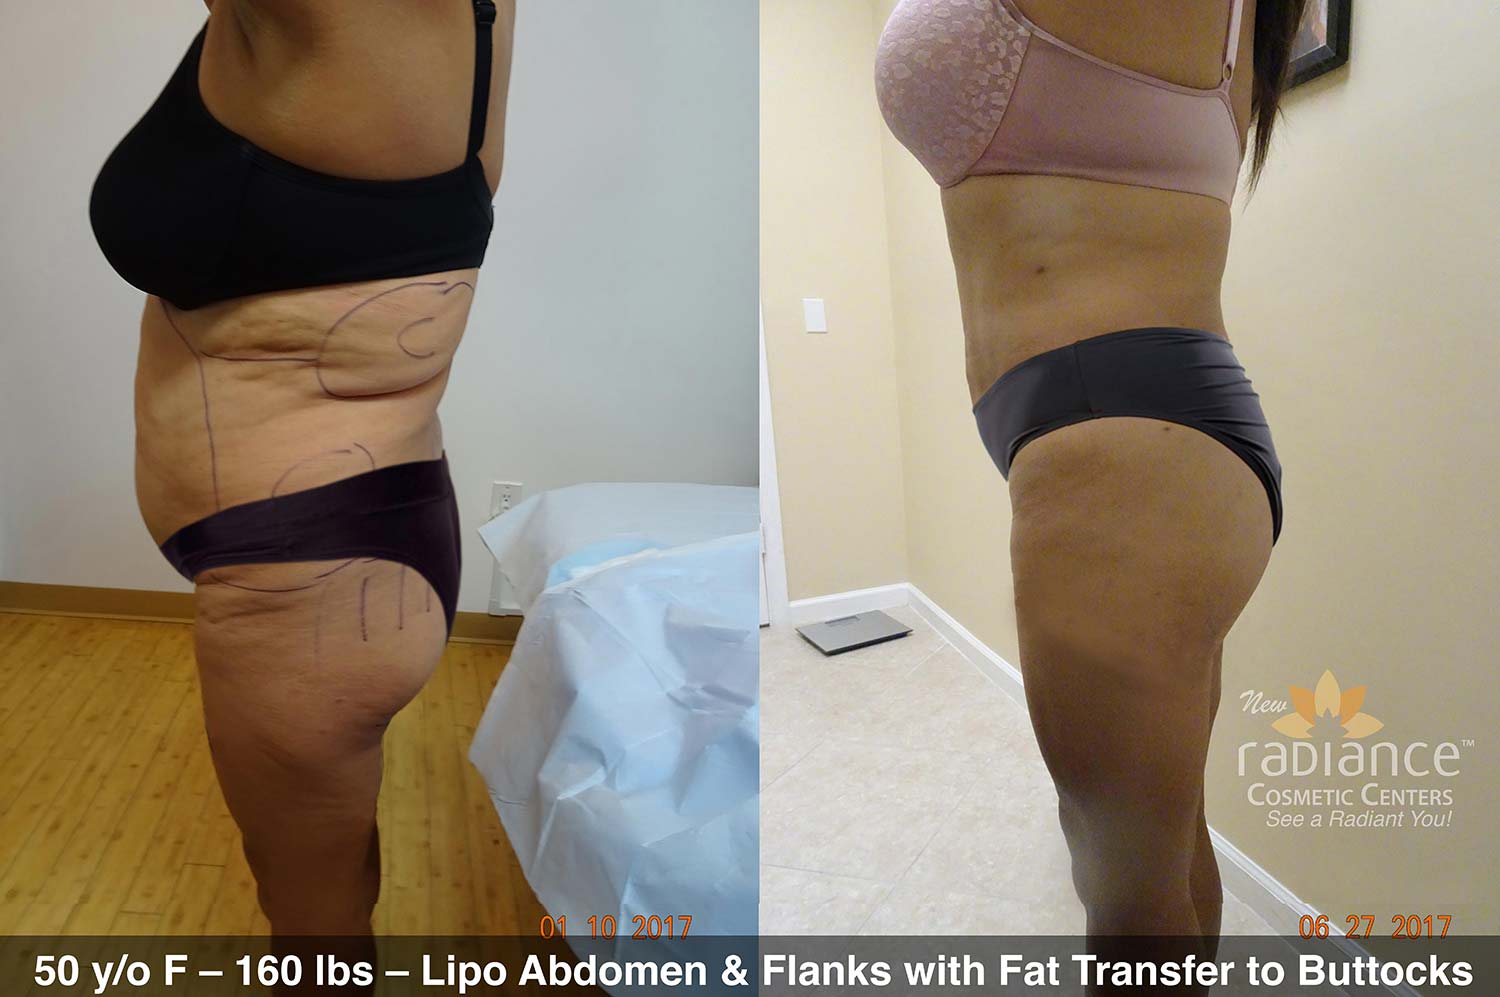 Brazilian Butt Lift | Liposuction with Fat Transfer to Buttocks in Florida